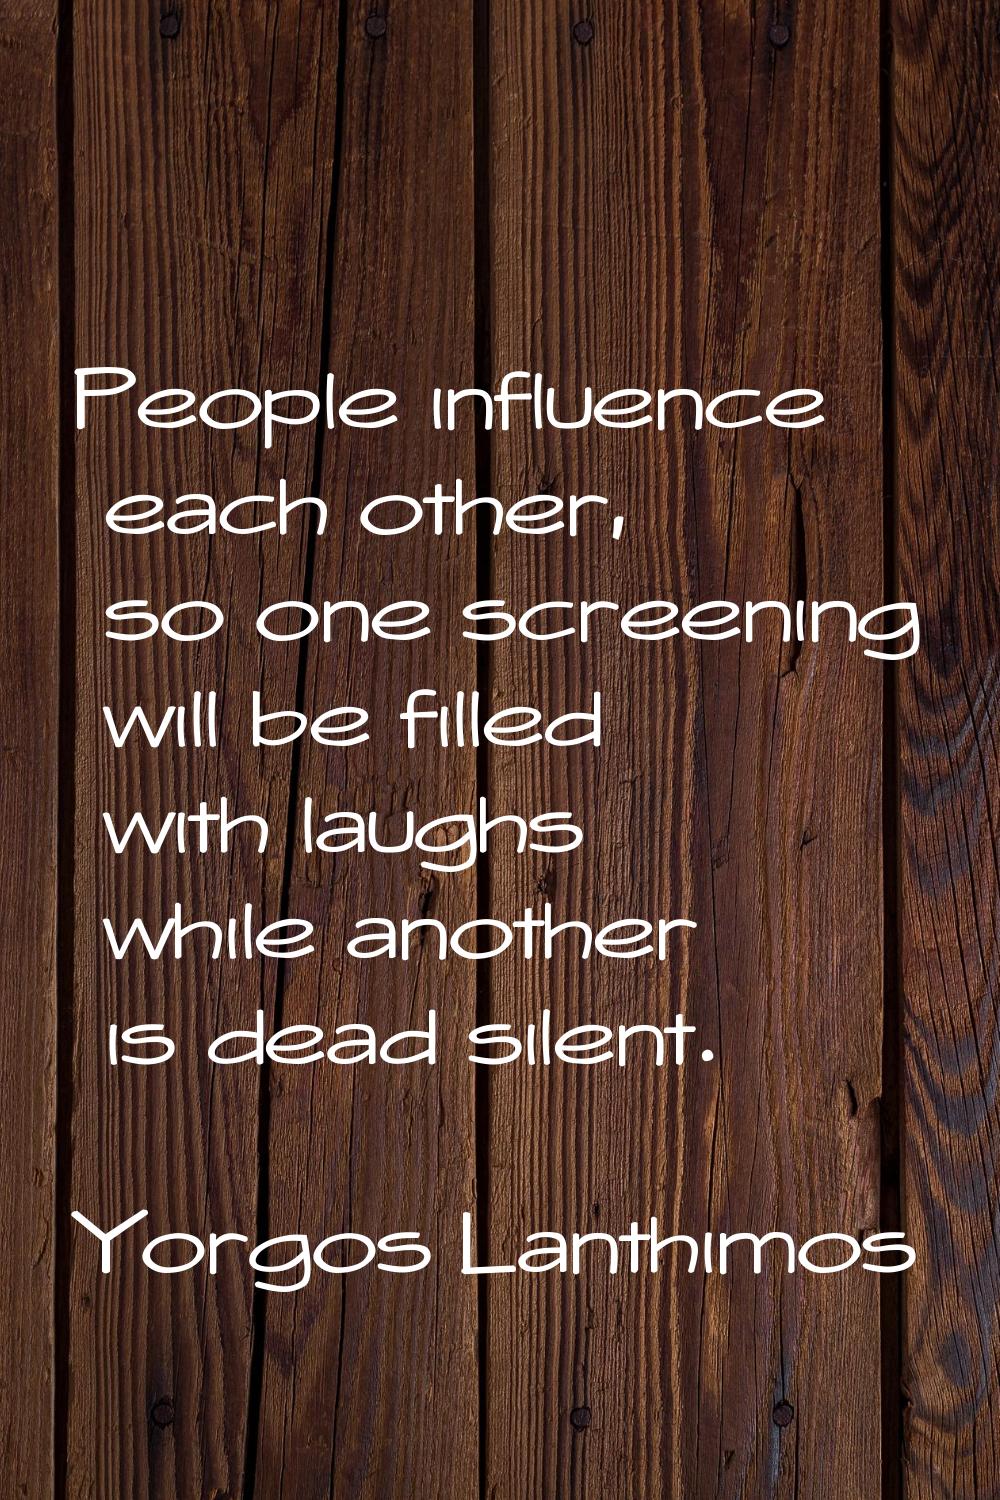 People influence each other, so one screening will be filled with laughs while another is dead sile